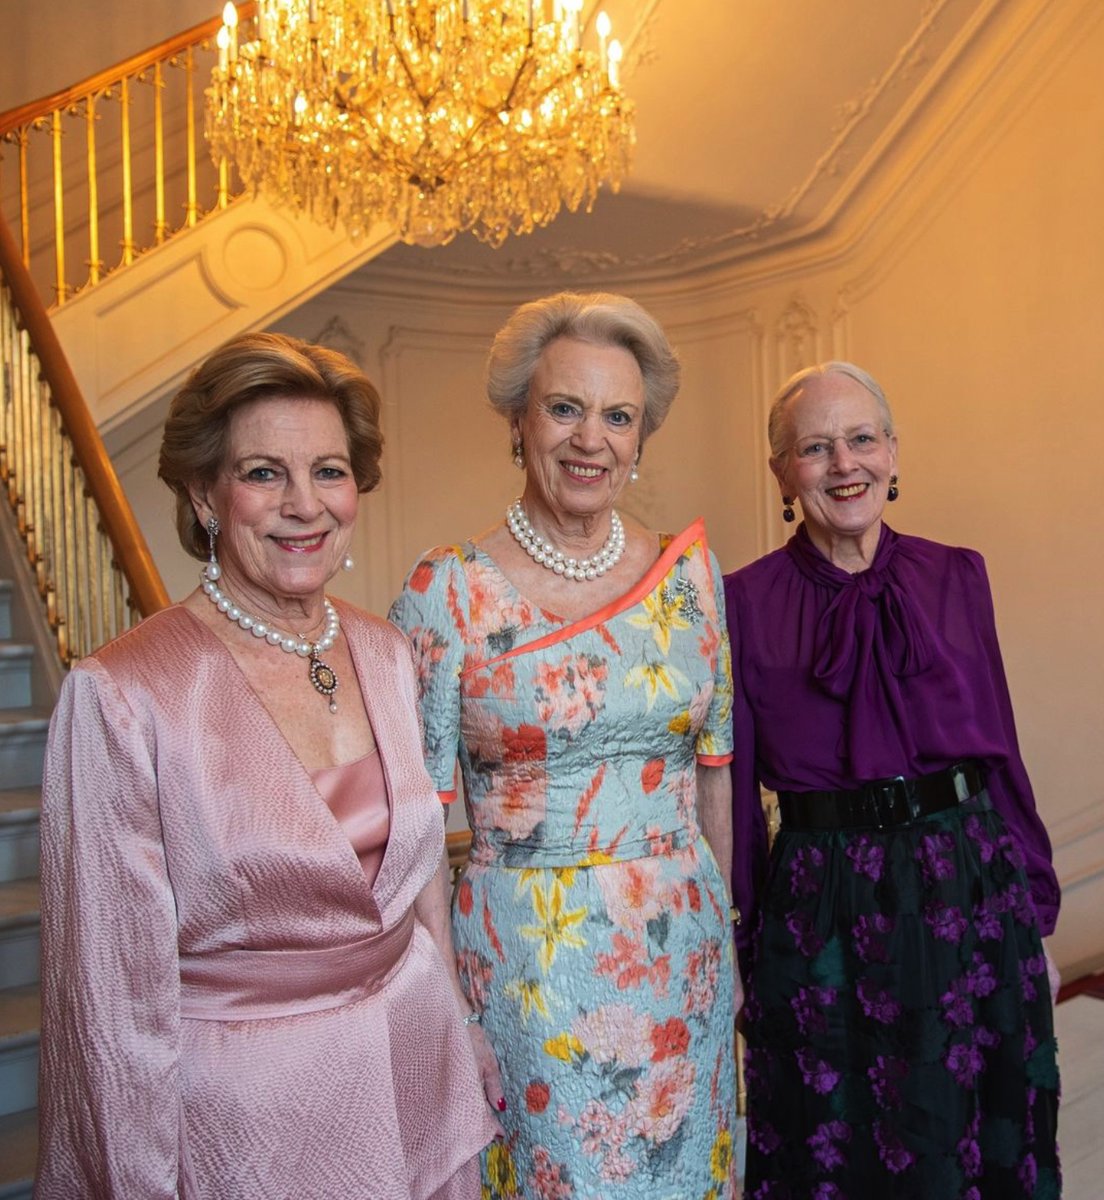 Princess Benedikte of Denmark is celebrating her 80th birthday at Amalienborg tonight in the company of her two sisters Queen Margrethe of Denmark (right) and Queen Anne-Marie of the Hellenes (left). 🇩🇰

📸© Kongehuset